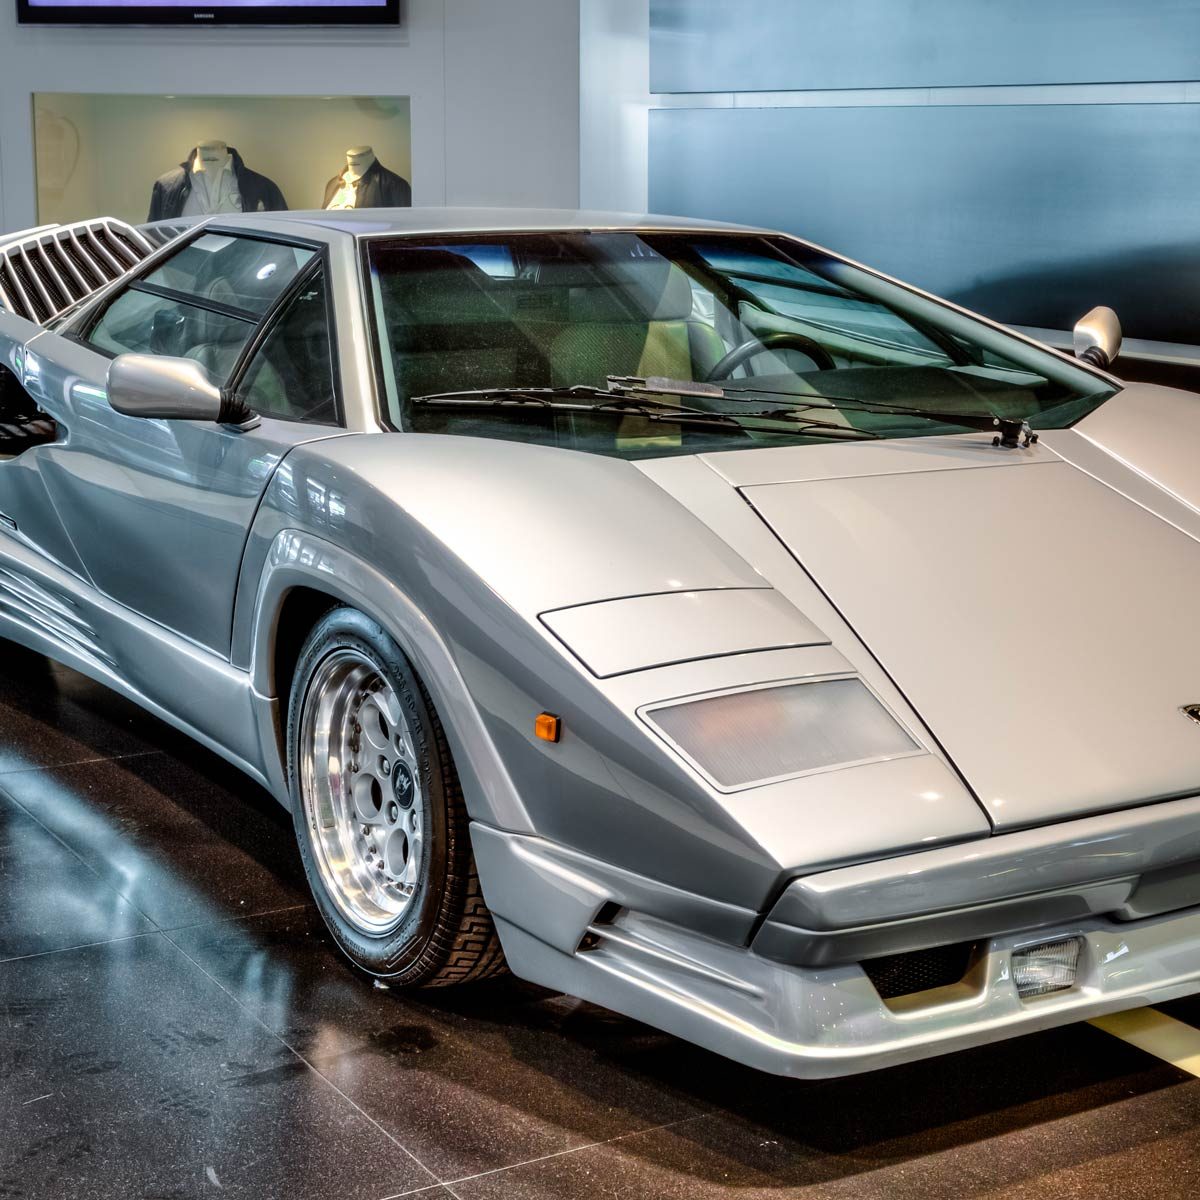 vintage luxury Lamborghini Countach produced from 1974 to 1990 on exposition at Bologna Airport for 100 years history of Lamborghini.